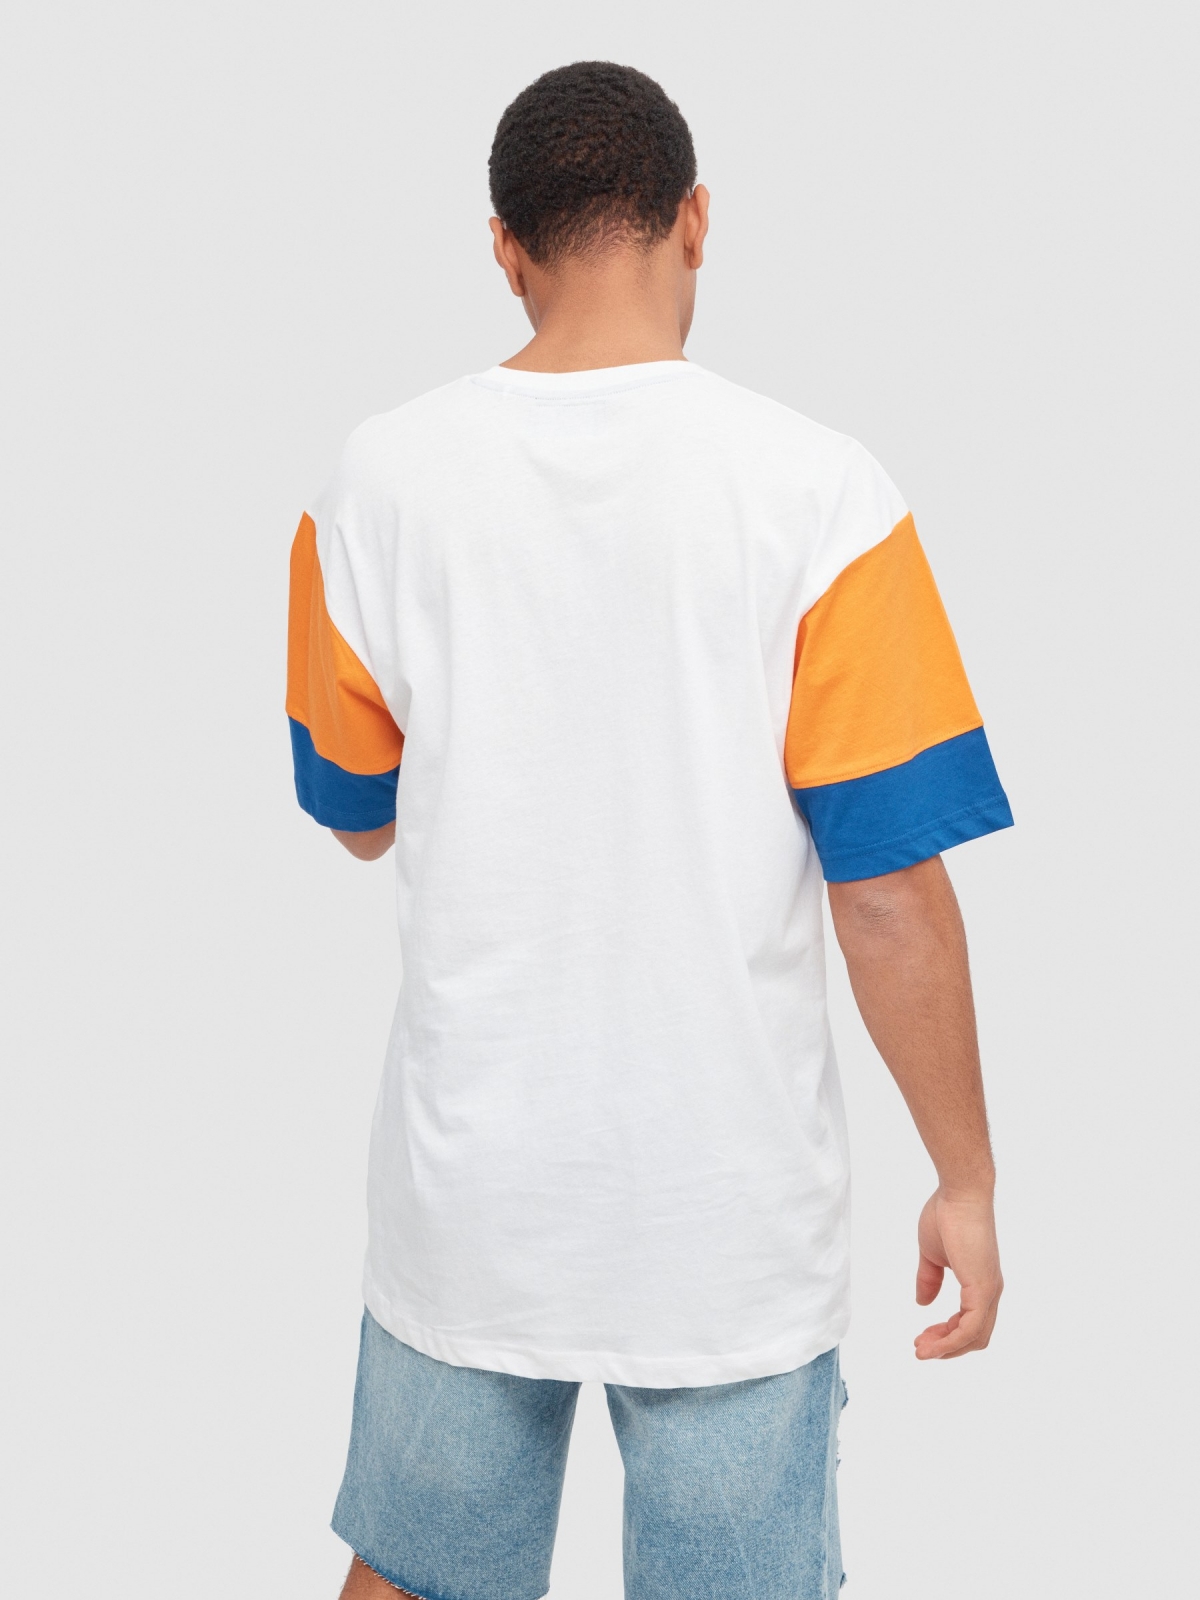 Striped sleeve t-shirt white middle back view